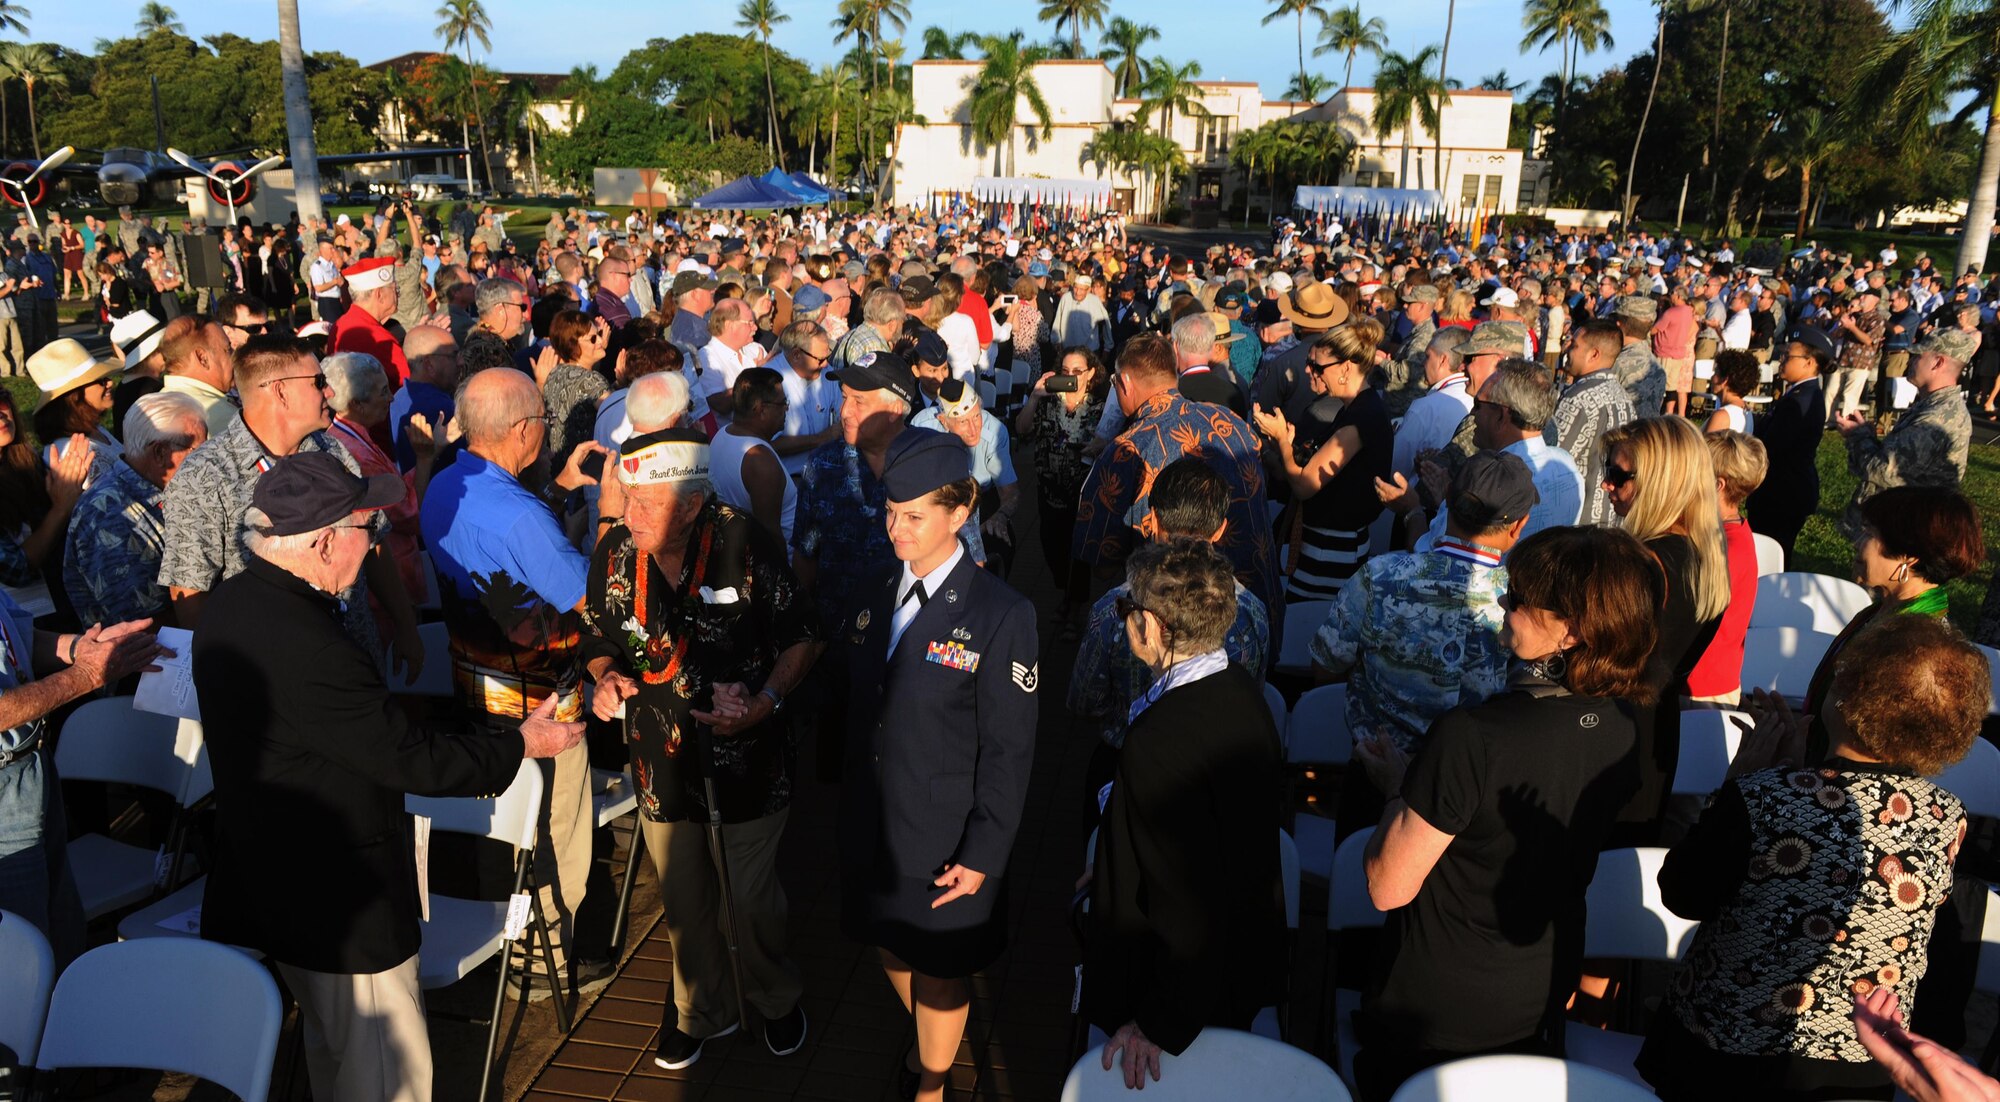 Survivors of the attacks on Pearl Harbor Naval Station and Hickam Field are honored as they enter the 75th Commemoration of the Dec. 7, 1941 Attack on Hickam Field ceremony Dec. 7, 2016, at Joint Base Pearl Harbor-Hickam, Hawaii. The attacks on seven bases throughout Oahu precipitated America's entry into World War II, and the annual commemoration ceremony is designed to foster reflection, remembrance, and understanding for those affected by the events that took place 75 years ago. (U.S. Air Force photo by Tech. Sgt. Nathan Allen)